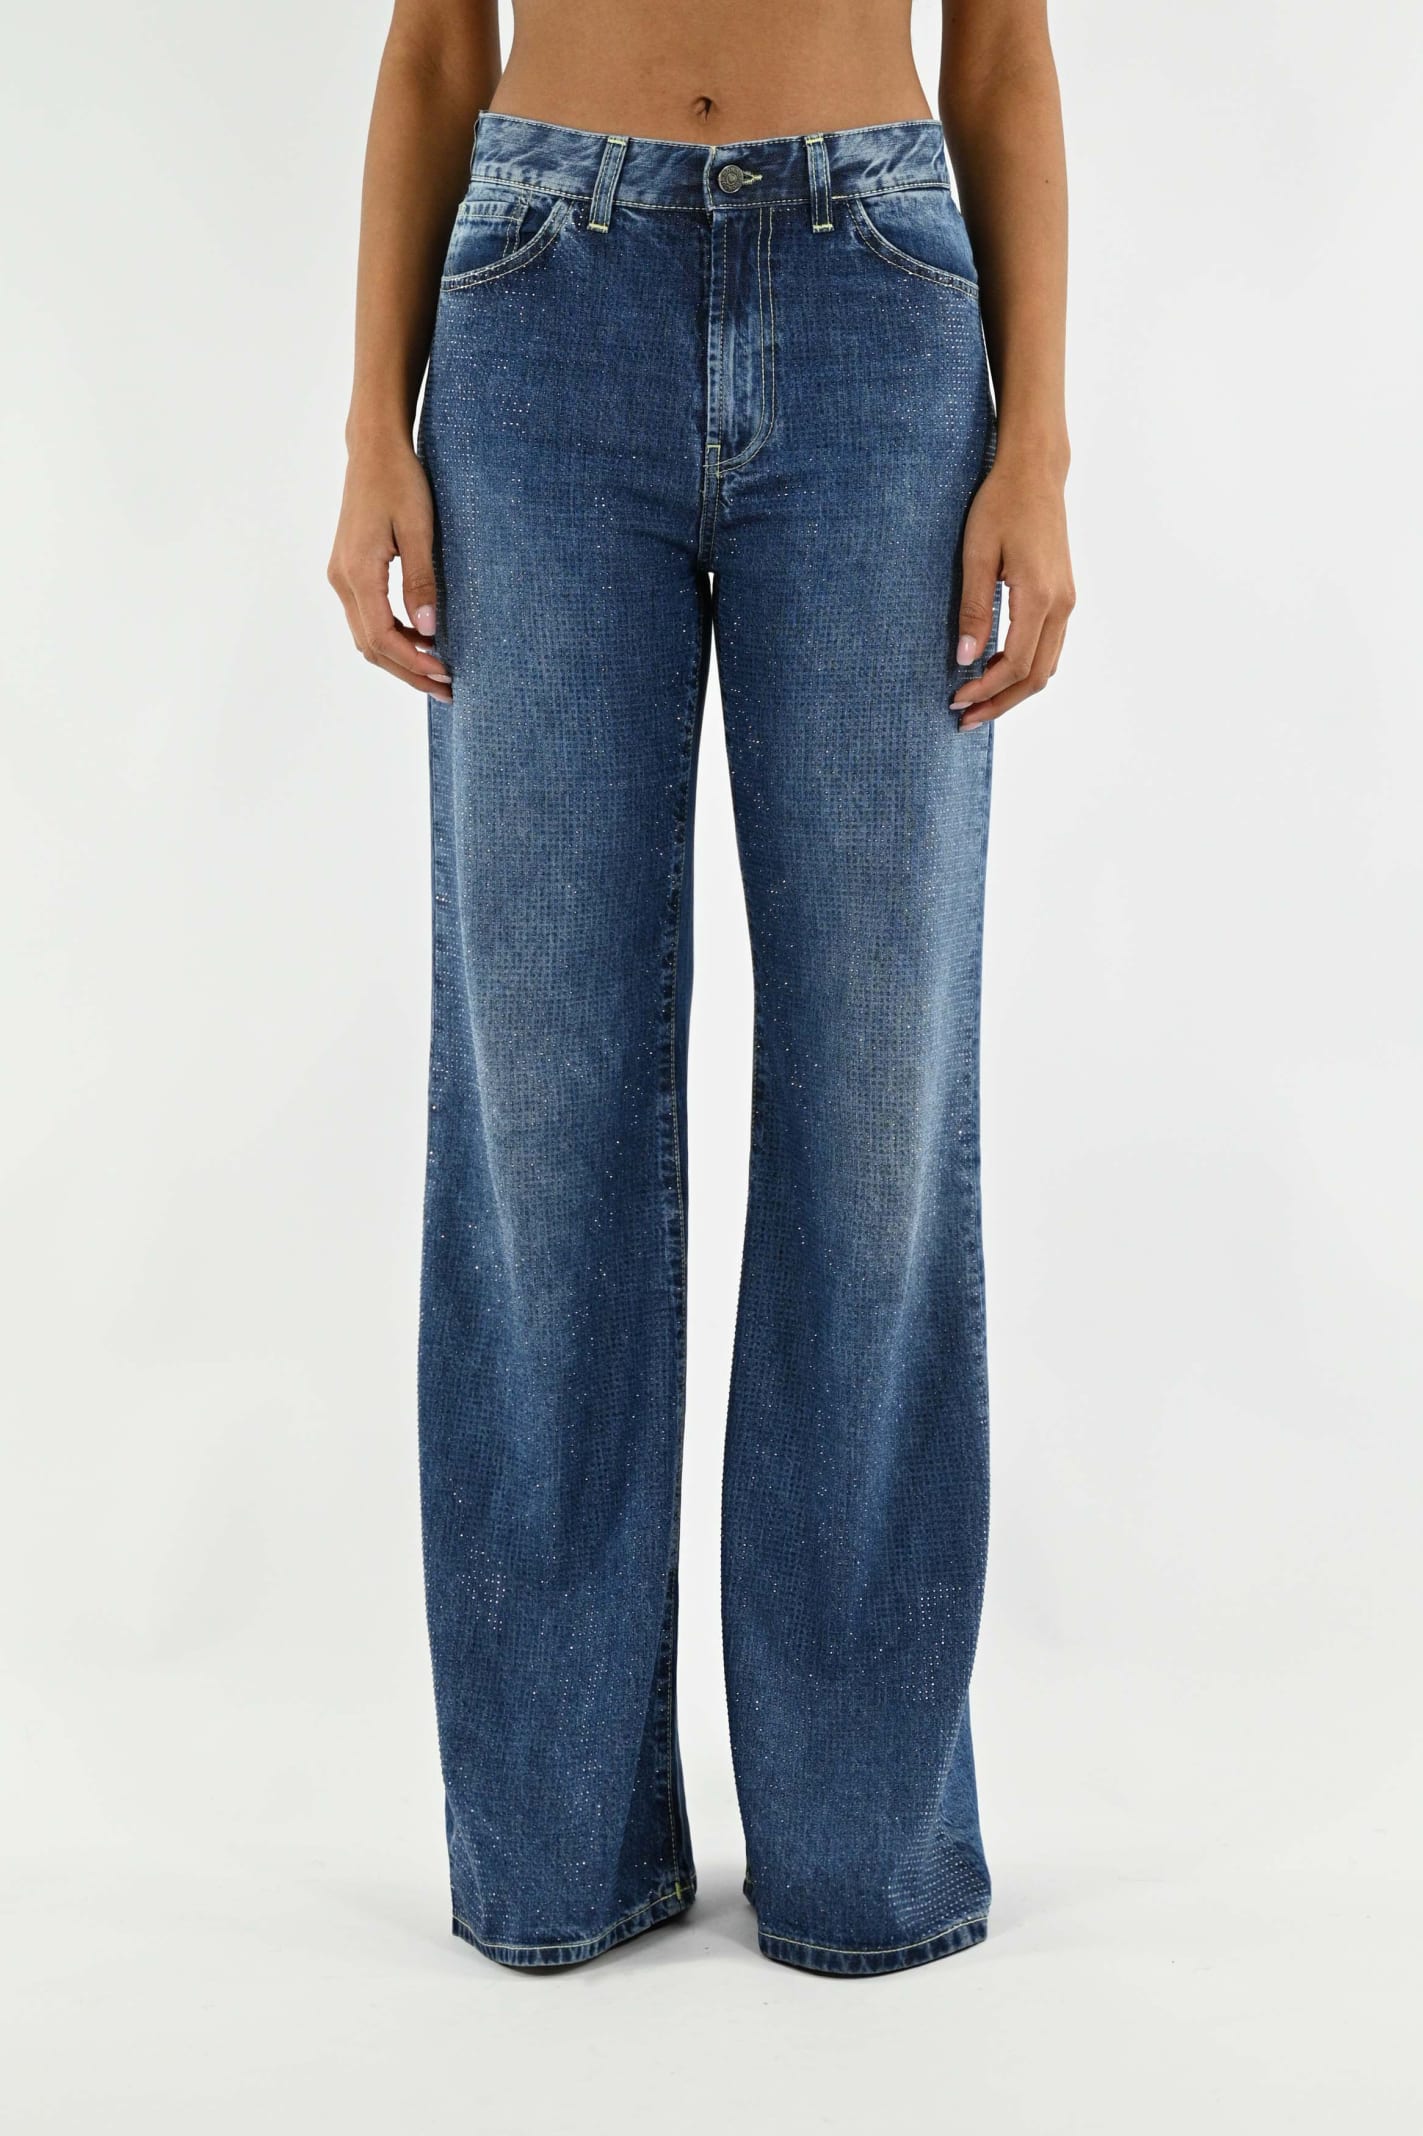 DONDUP WIDE LEG AMBER JEANS IN FIXED DENIM